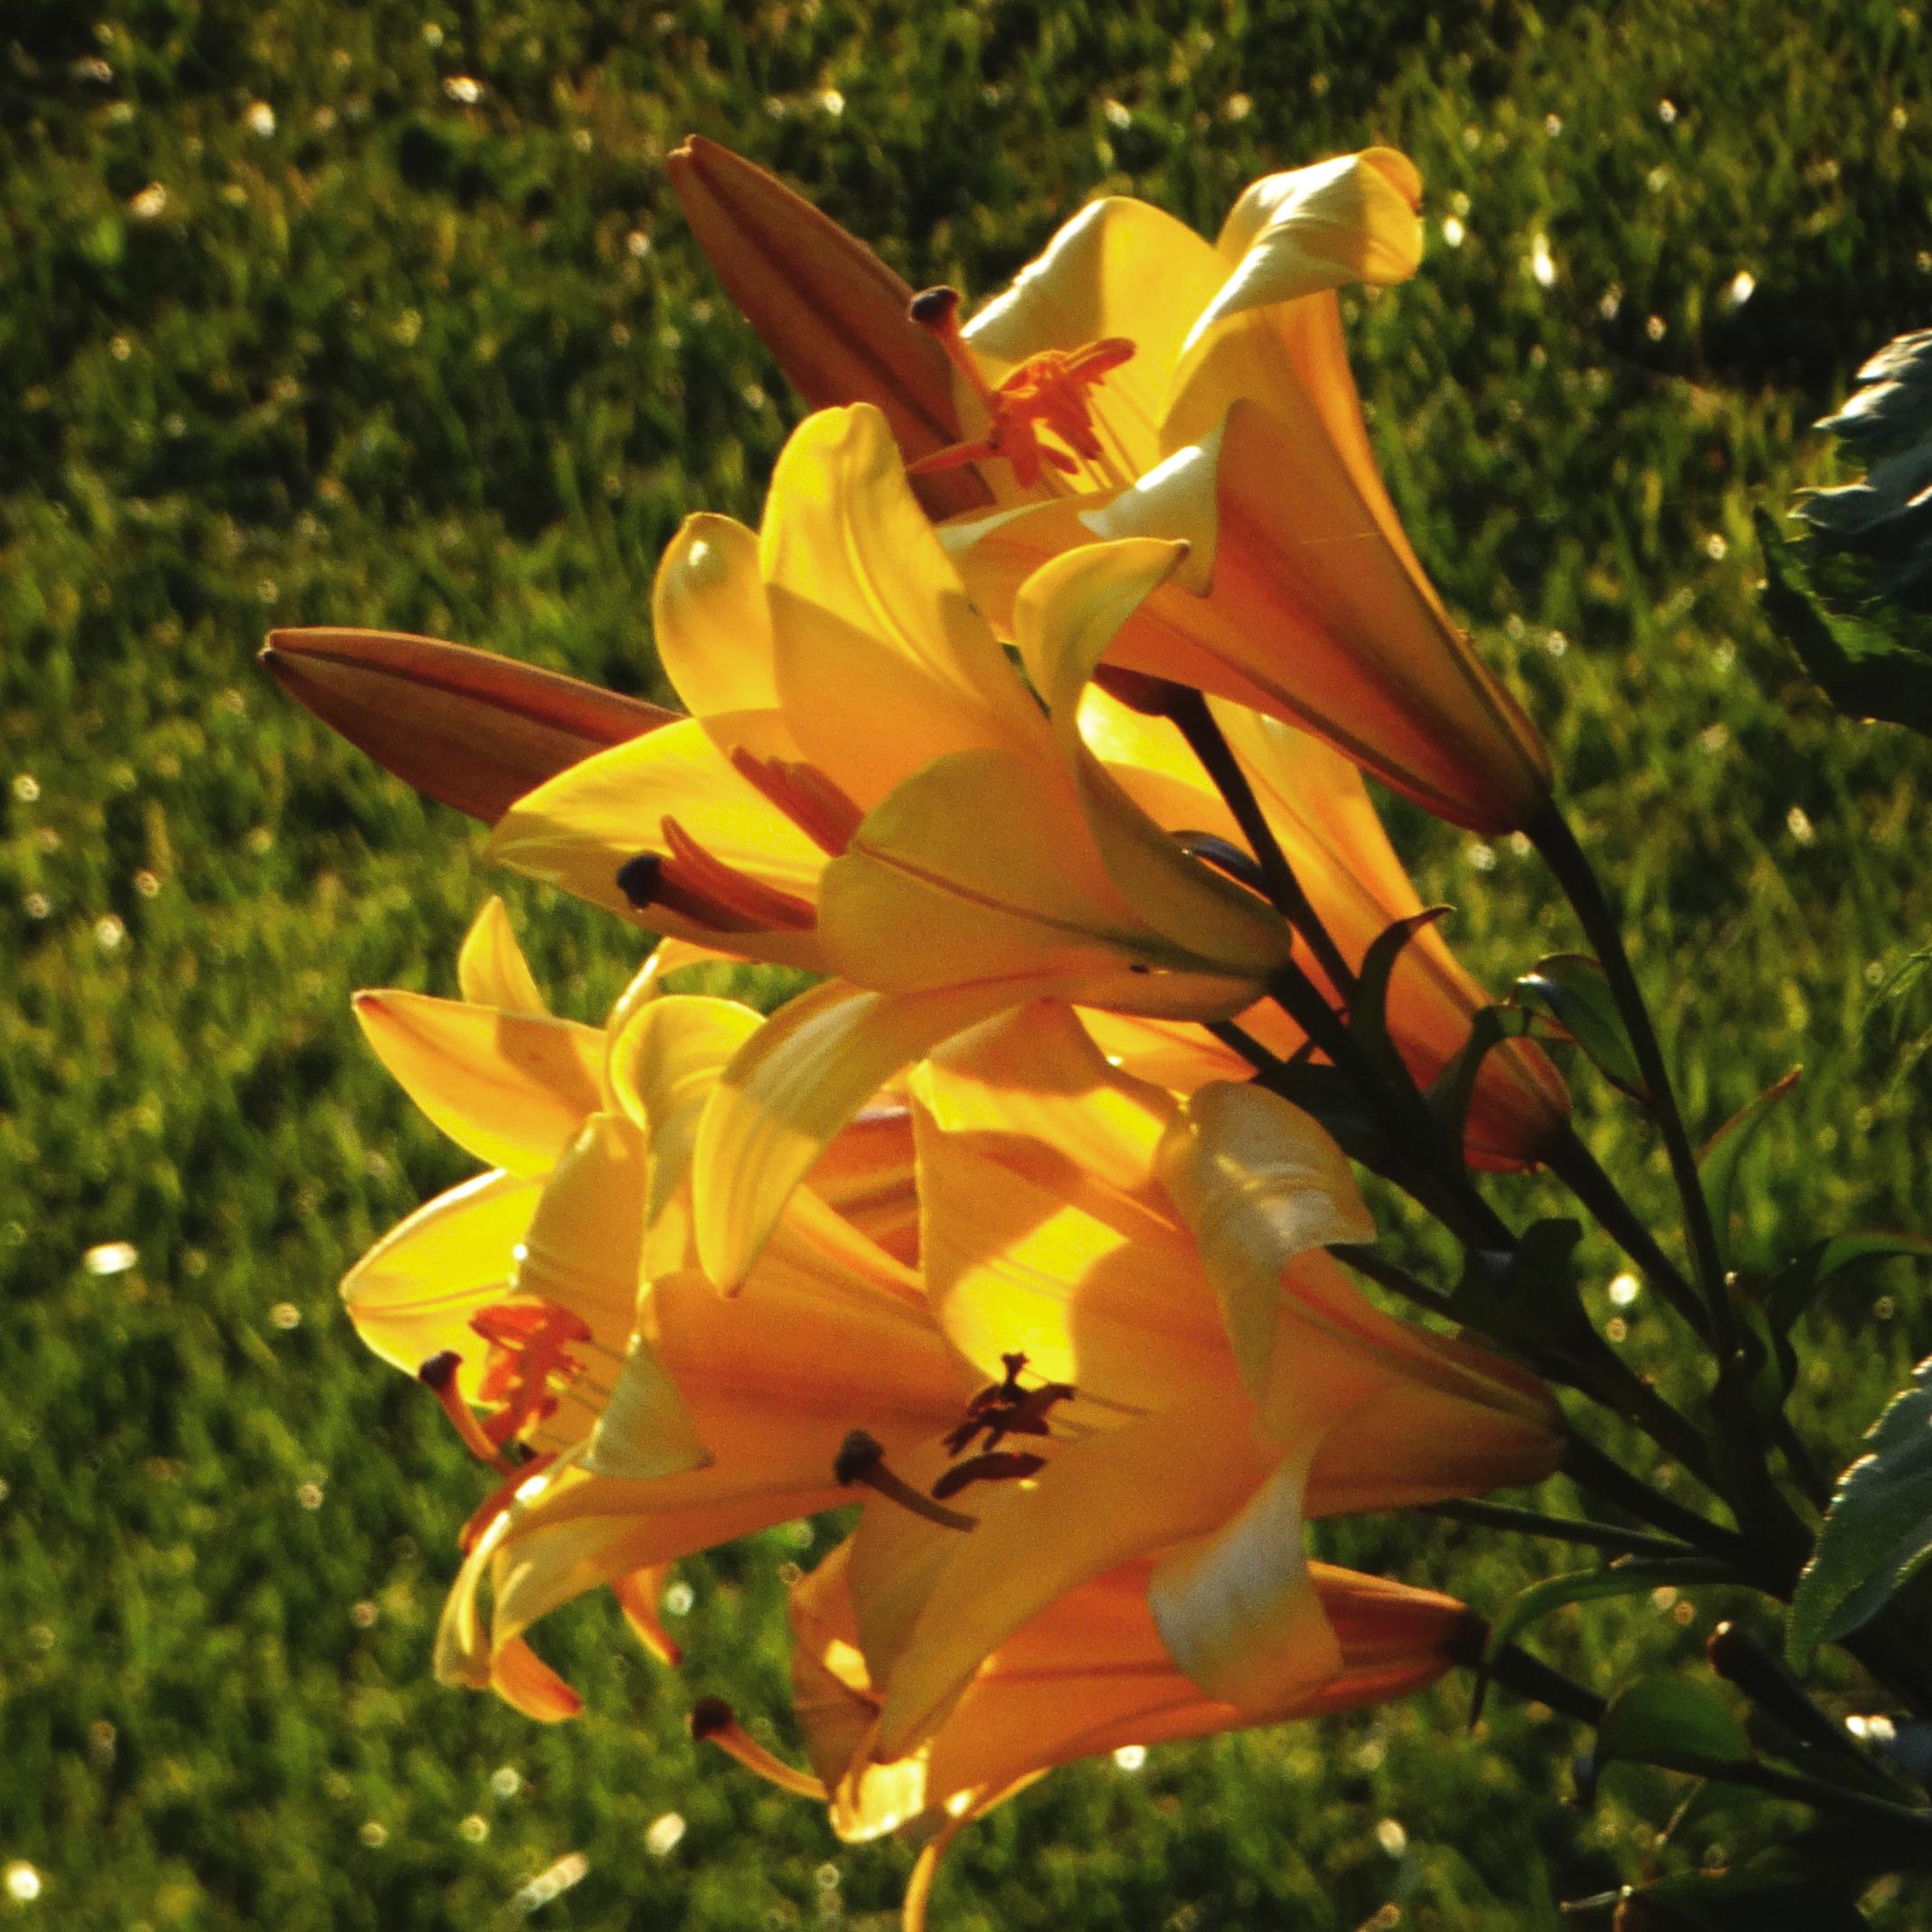 Lilies Oriental Trumpet 'Yellow Planet' - Tree Lilies/Orienpet Lily from Leo Berbee Bulb Company